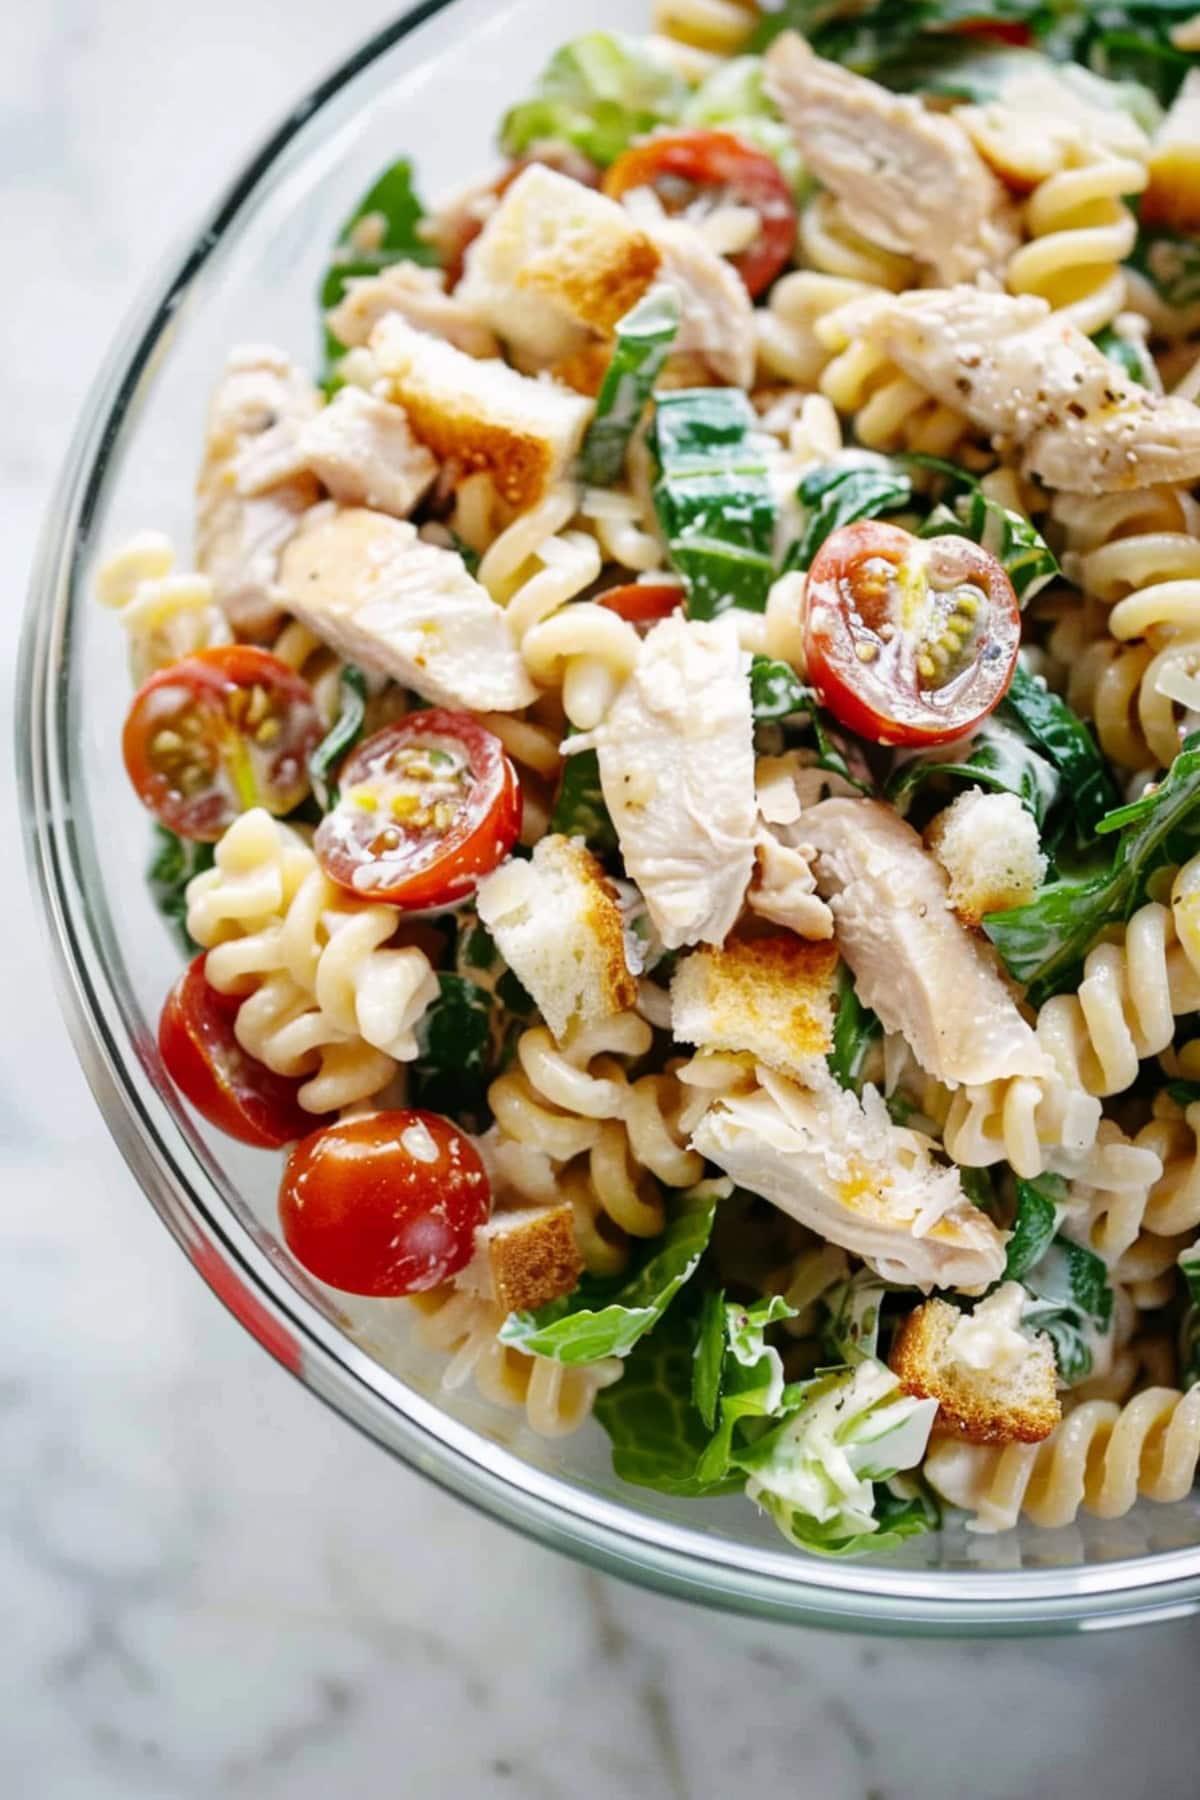 Savory and creamy rotini pasta salad with tender chicken, fresh green lettuce and cherry tomatoes in a glass bowl.